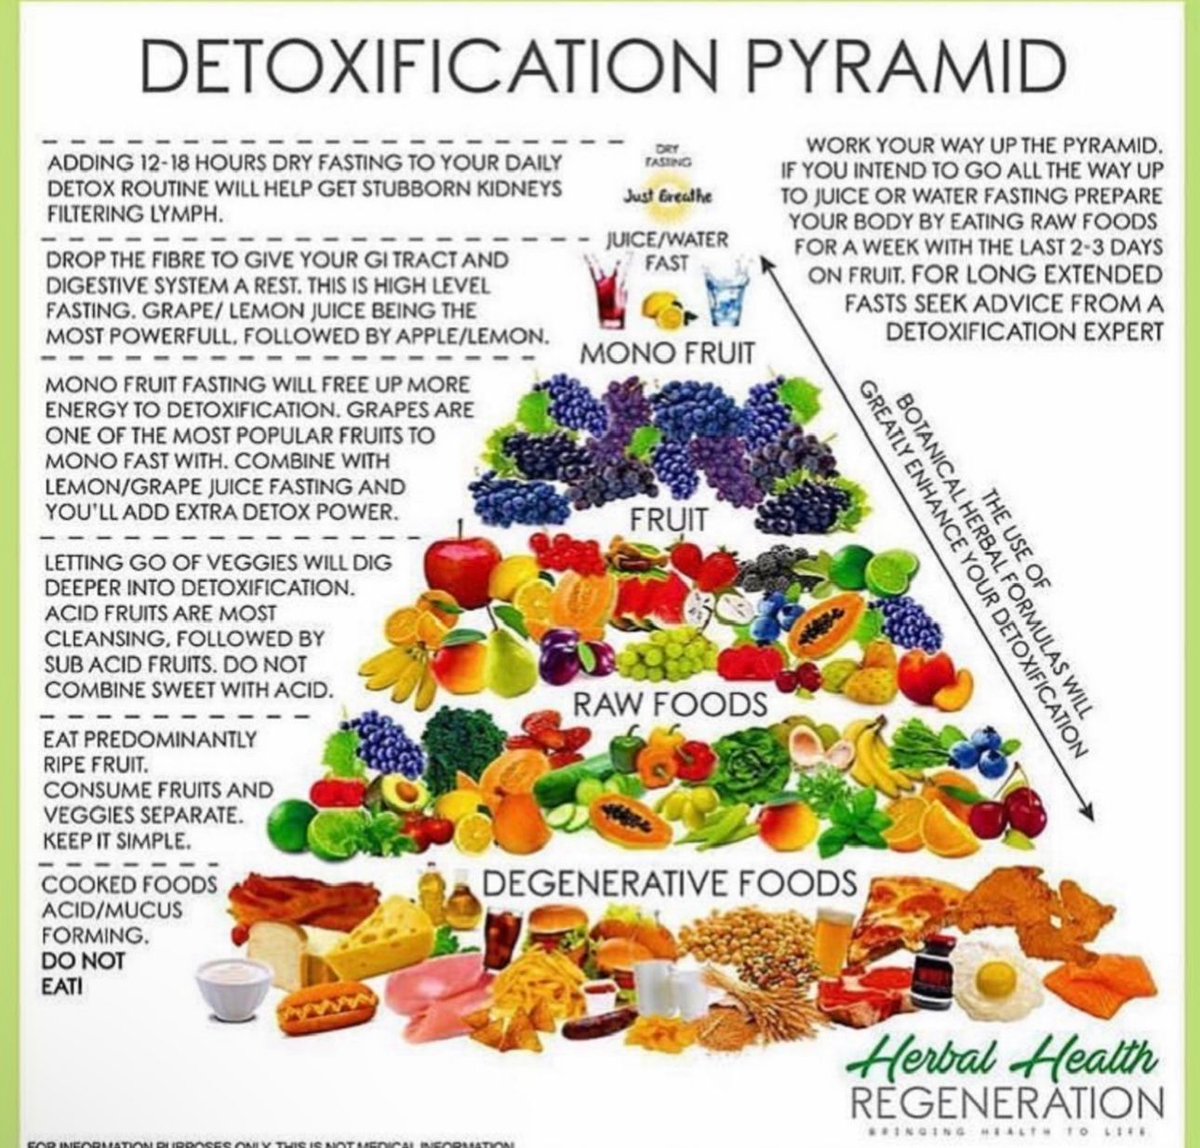 There is a better pyramid,  #nutrition #wellness #wellnessblog #plantmedicine #plantbasednutrition #healthyself #foodismedicine #healthyliving #healthylifestyle #wellnesswarrior #healthylivingtips #healingwithfood #healthy #healthylifestyle #fyp